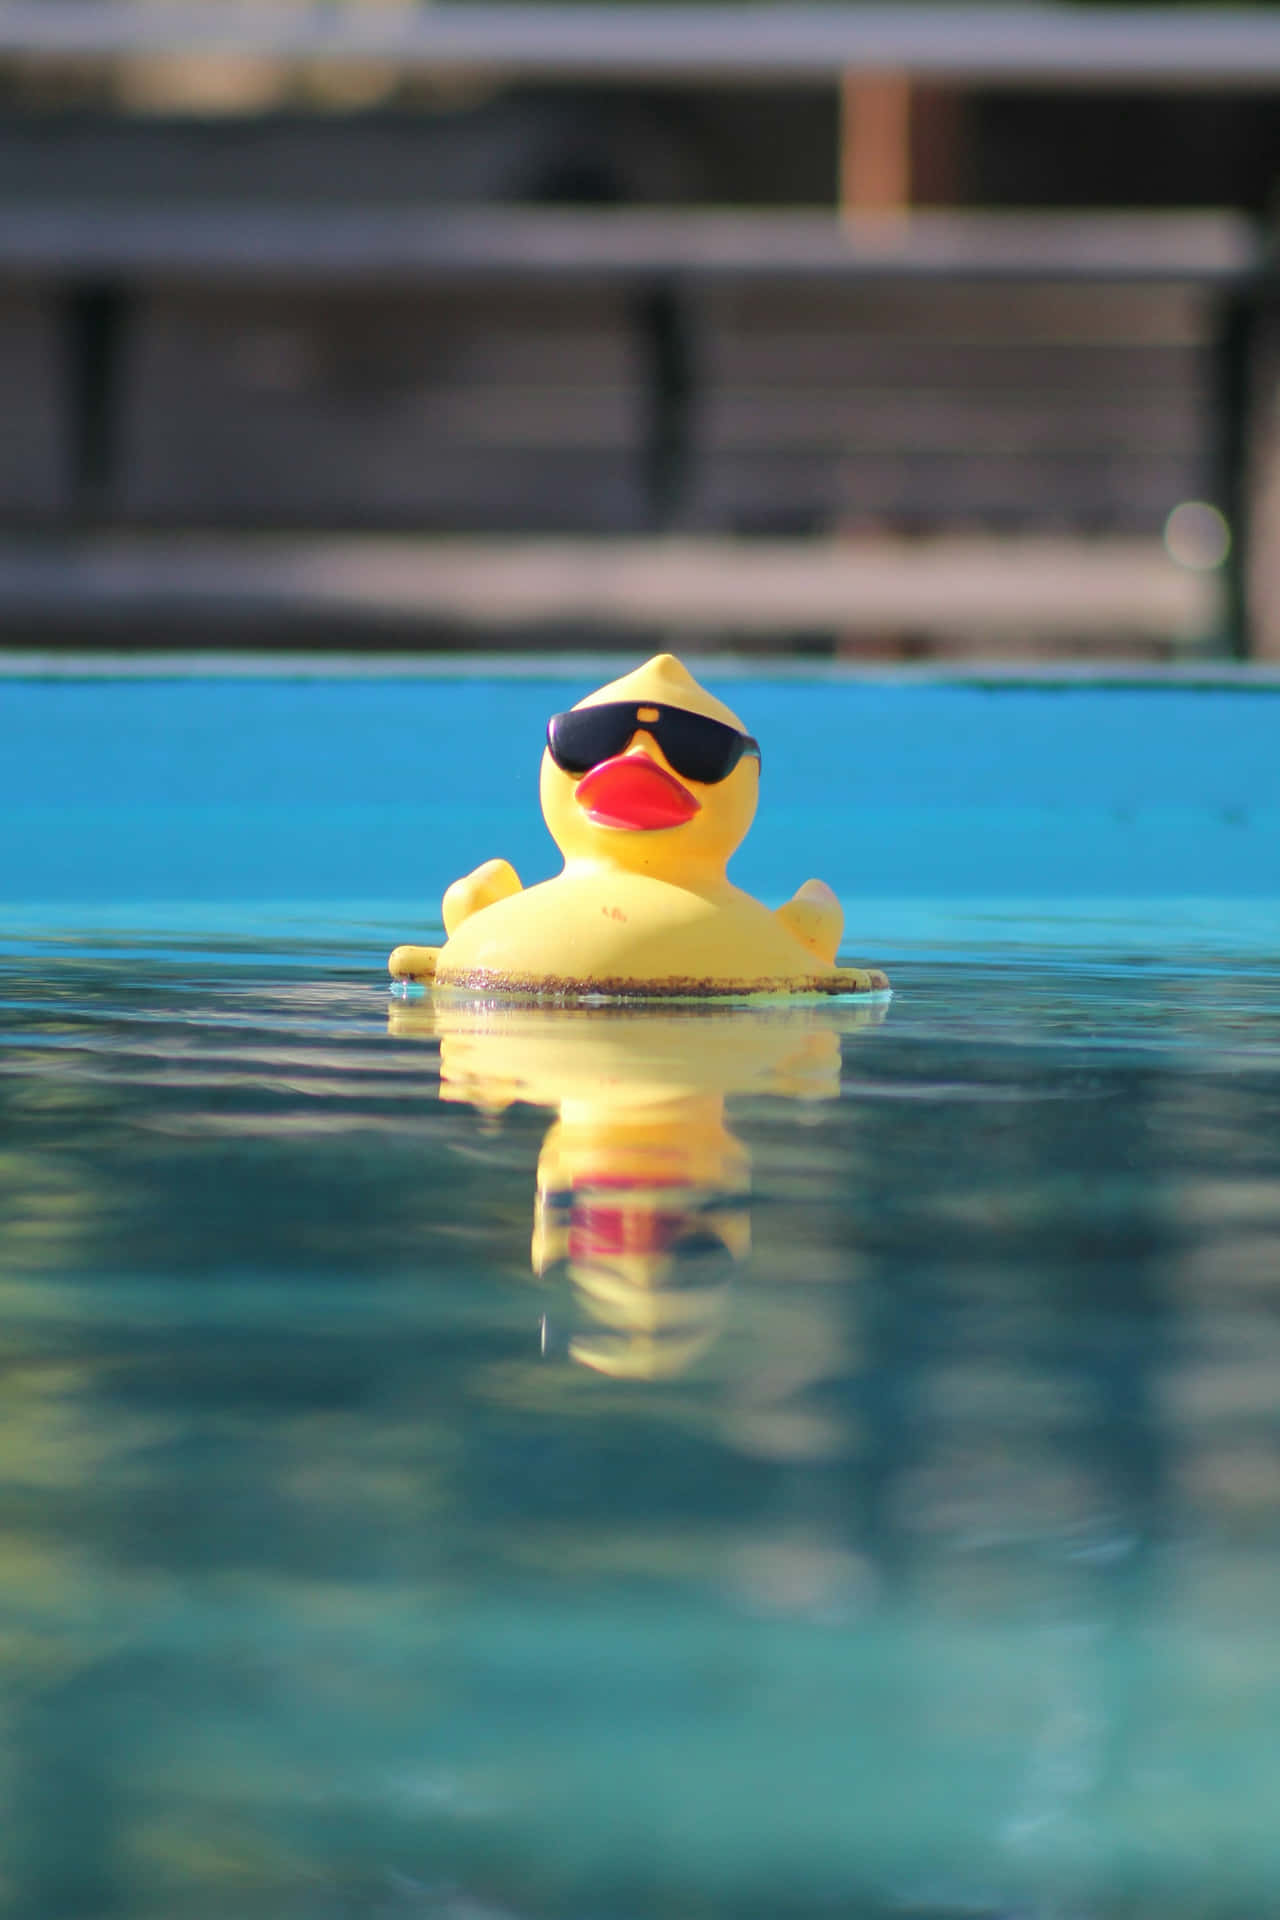 Cool Rubber Ducky Sunglasses Pool Wallpaper